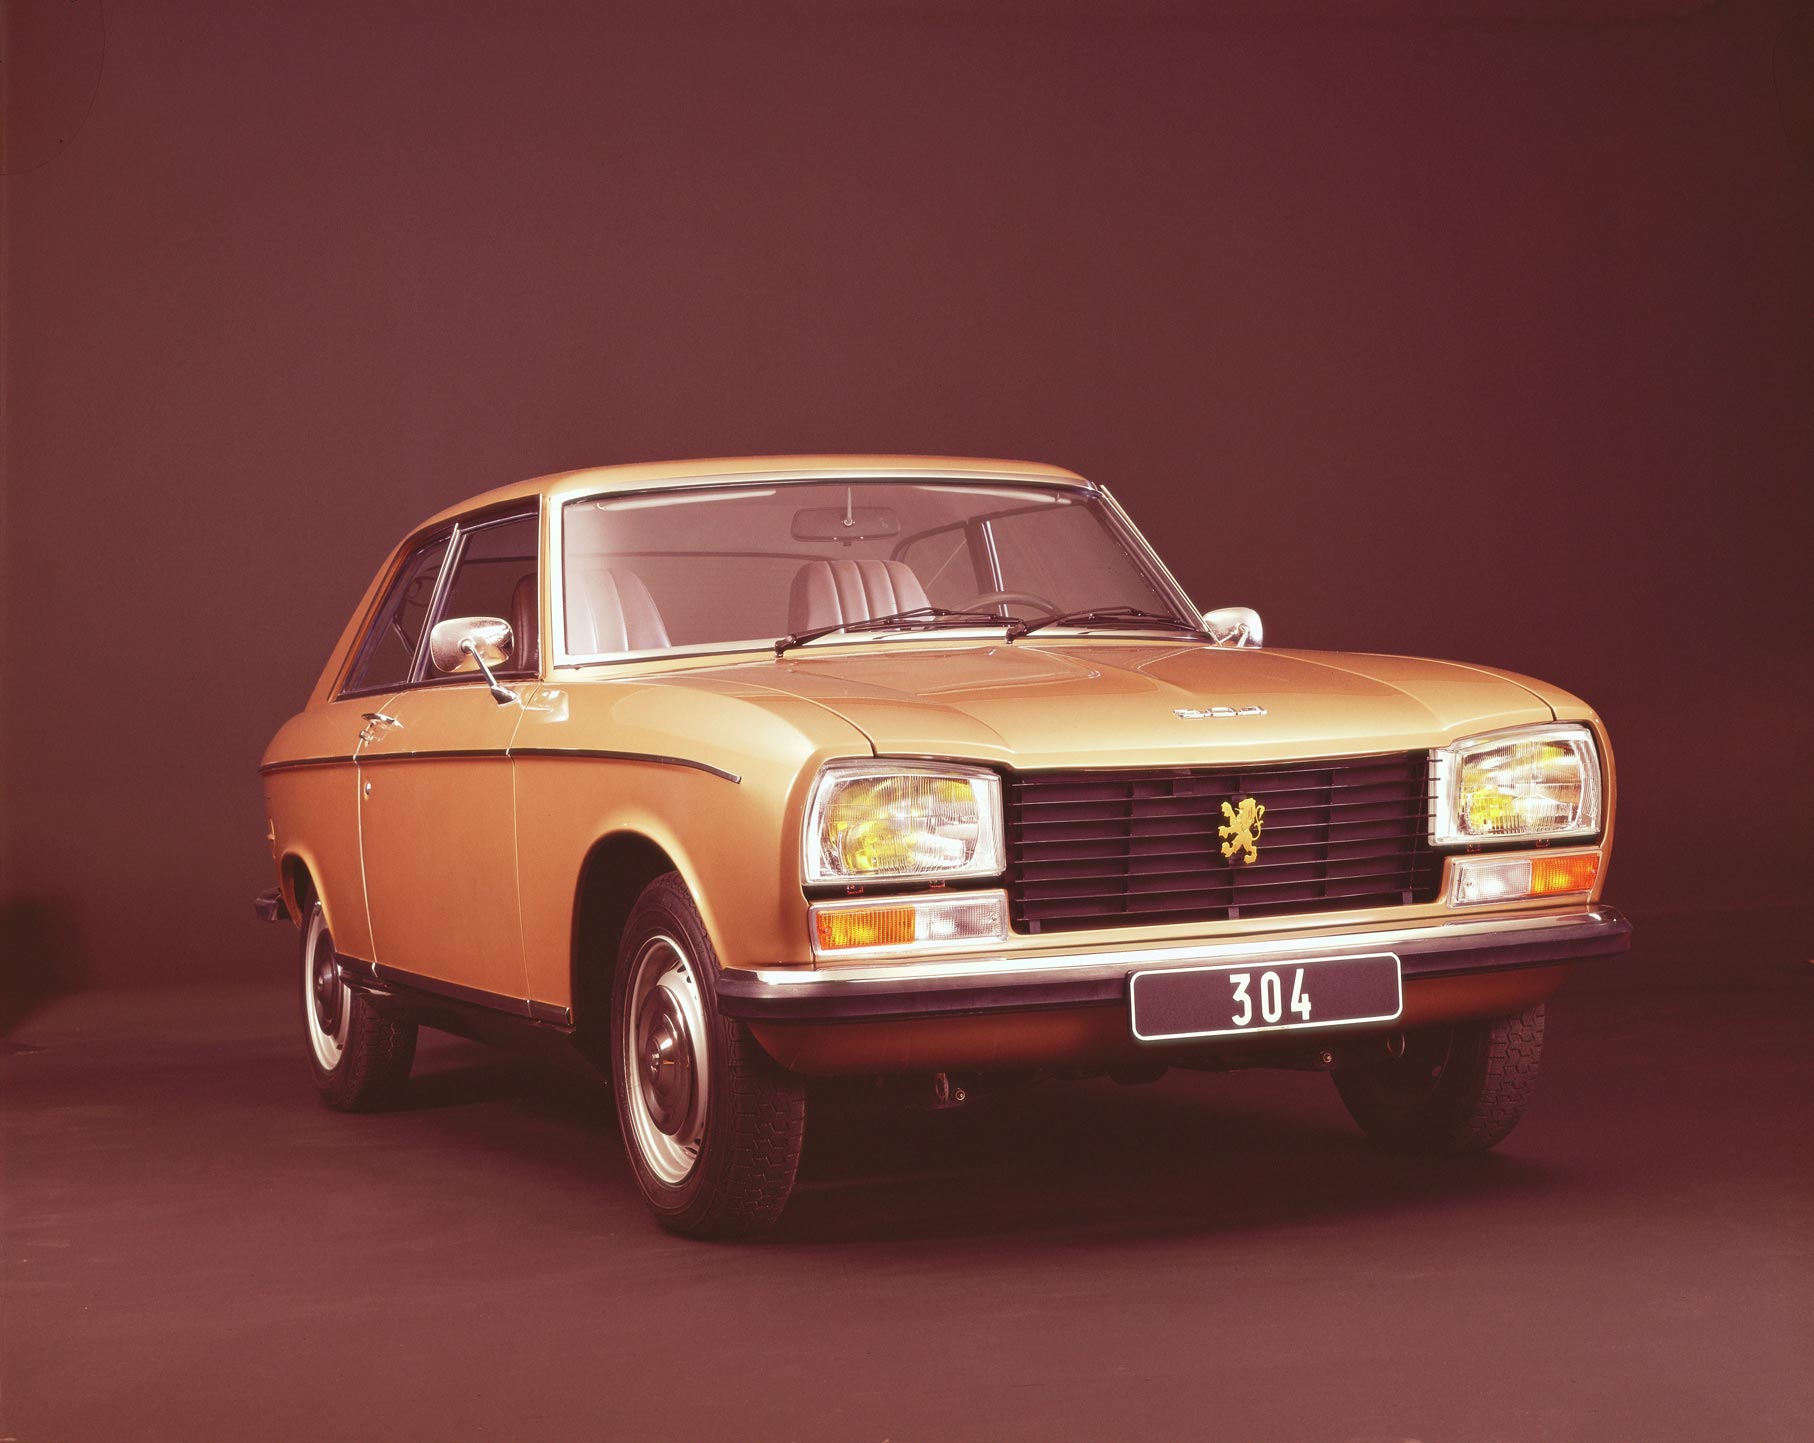 Peugeot 304 Coupe (01.1970 - 12.1975)